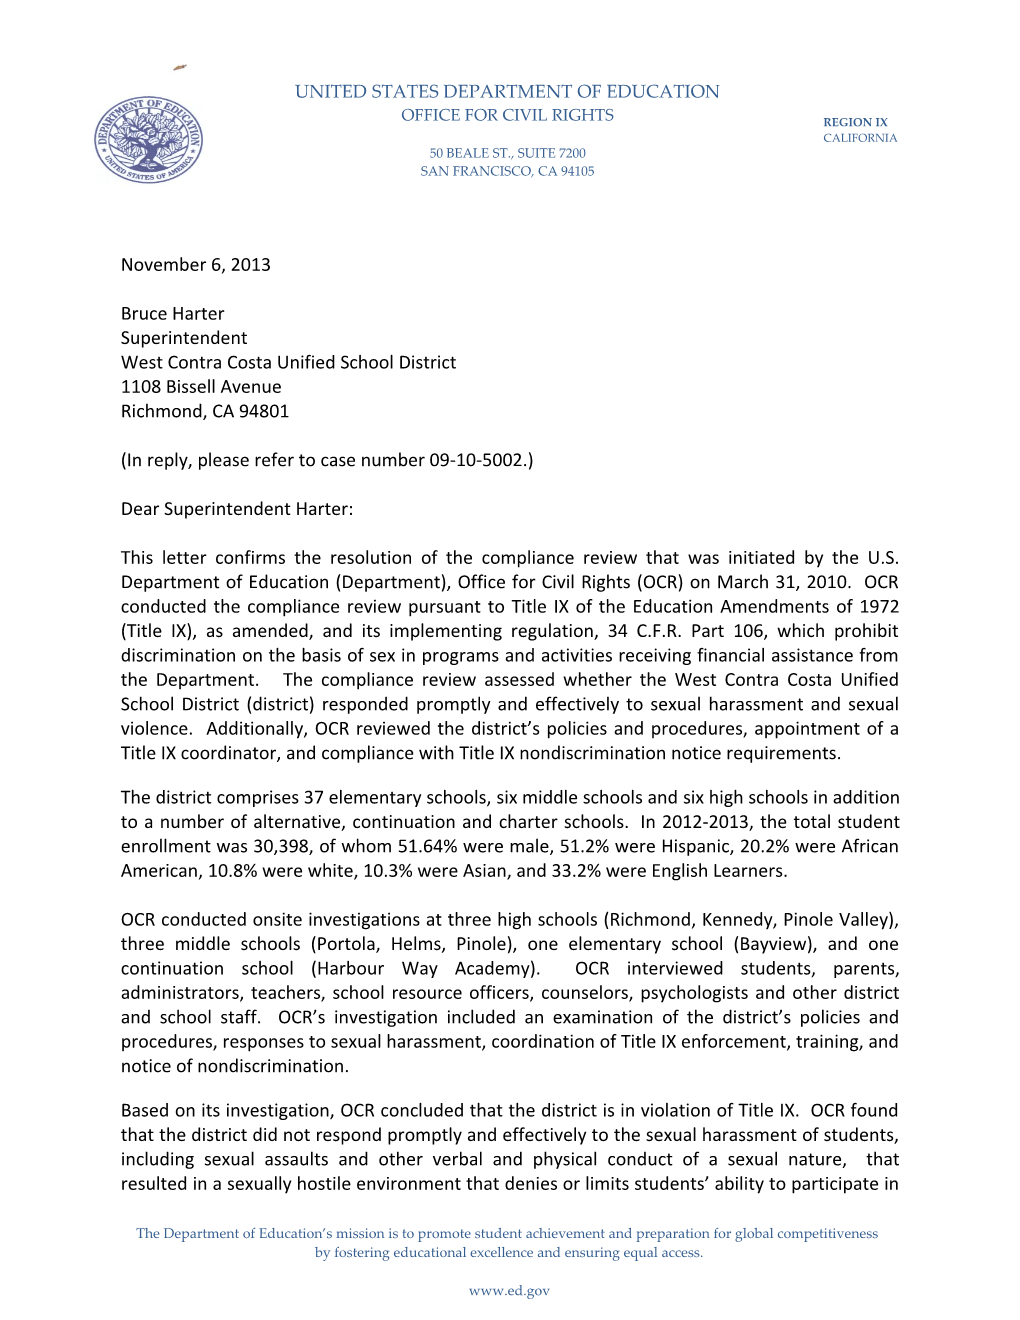 Resolution Letter to West Contra Costa Unified School District, California: Compliance